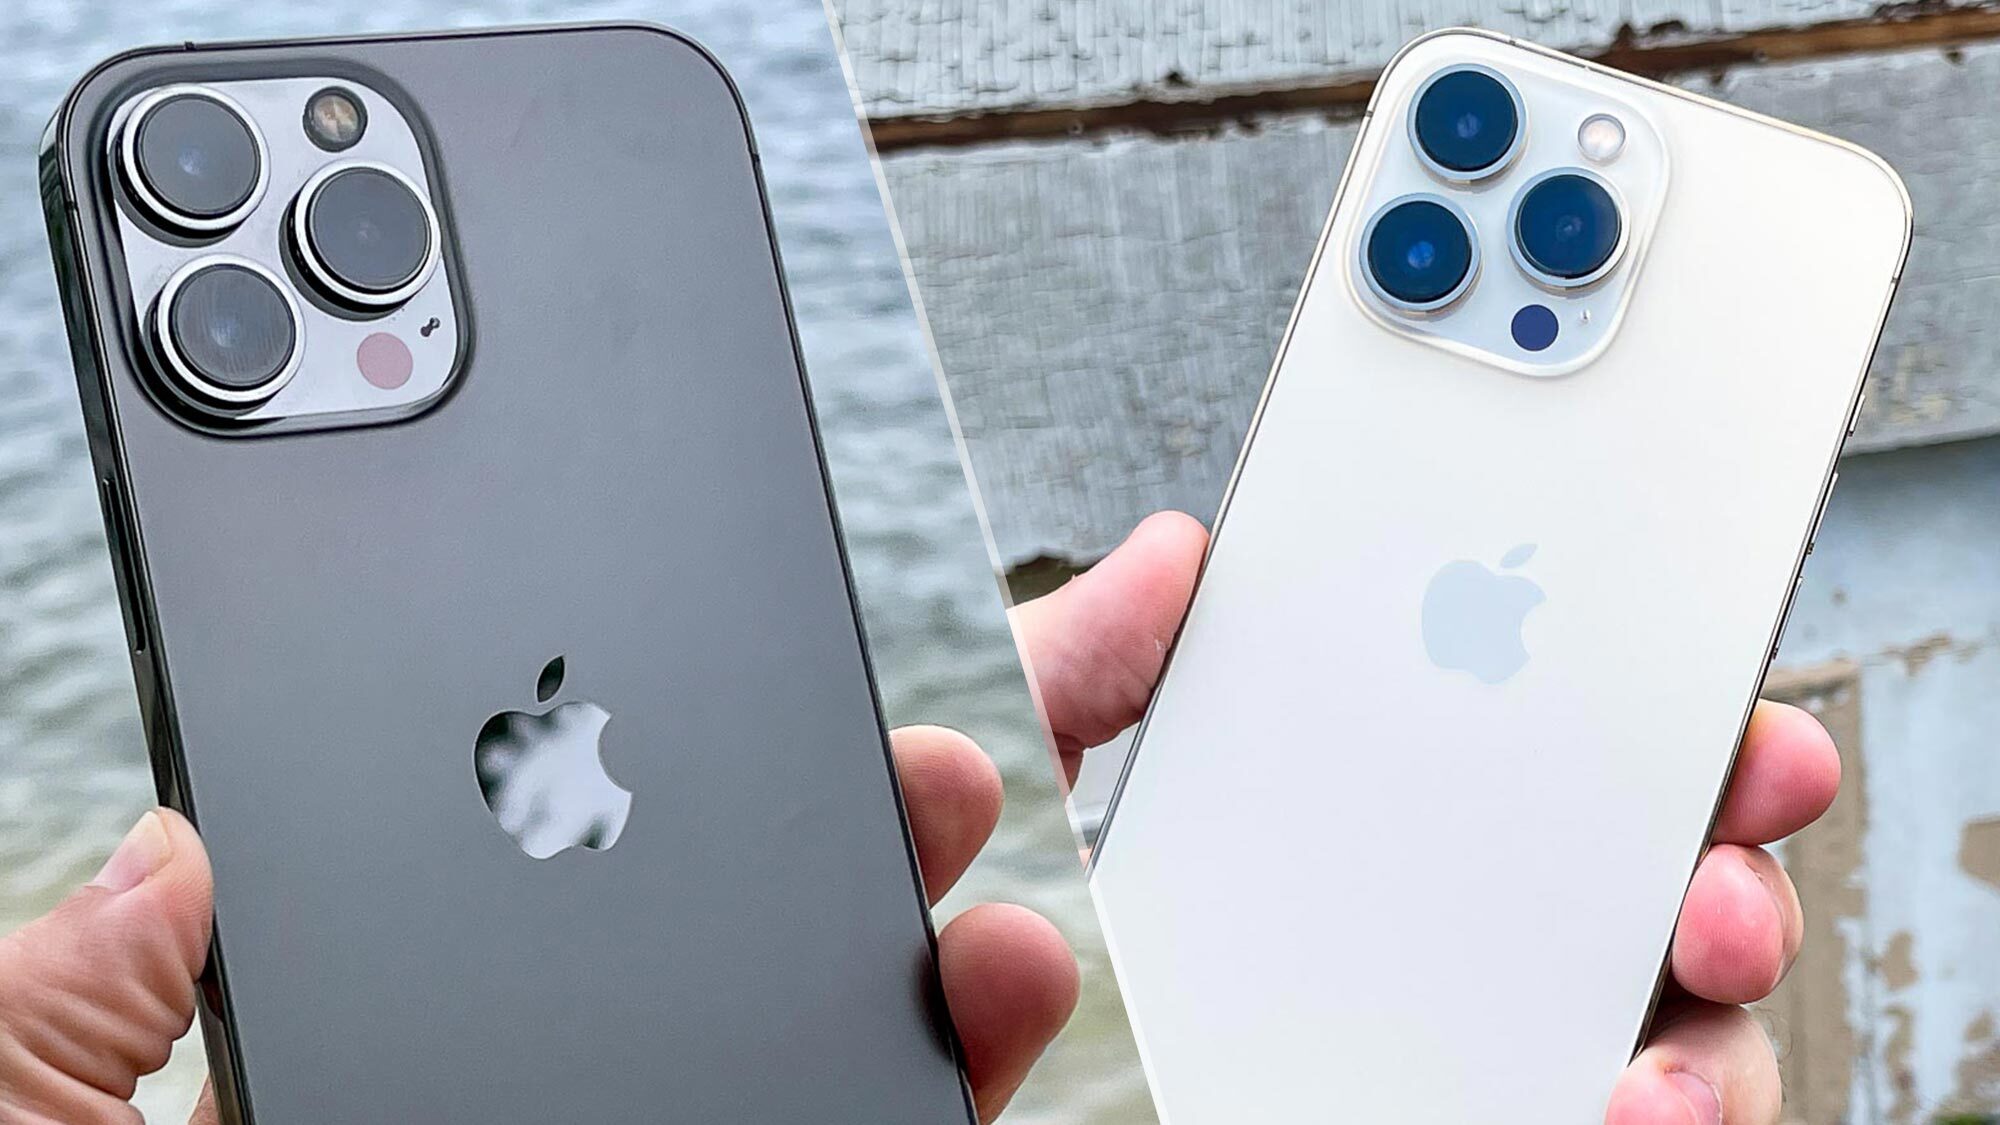 iPhone 13 Pro vs iPhone 13 Pro Max: What are the differences? 